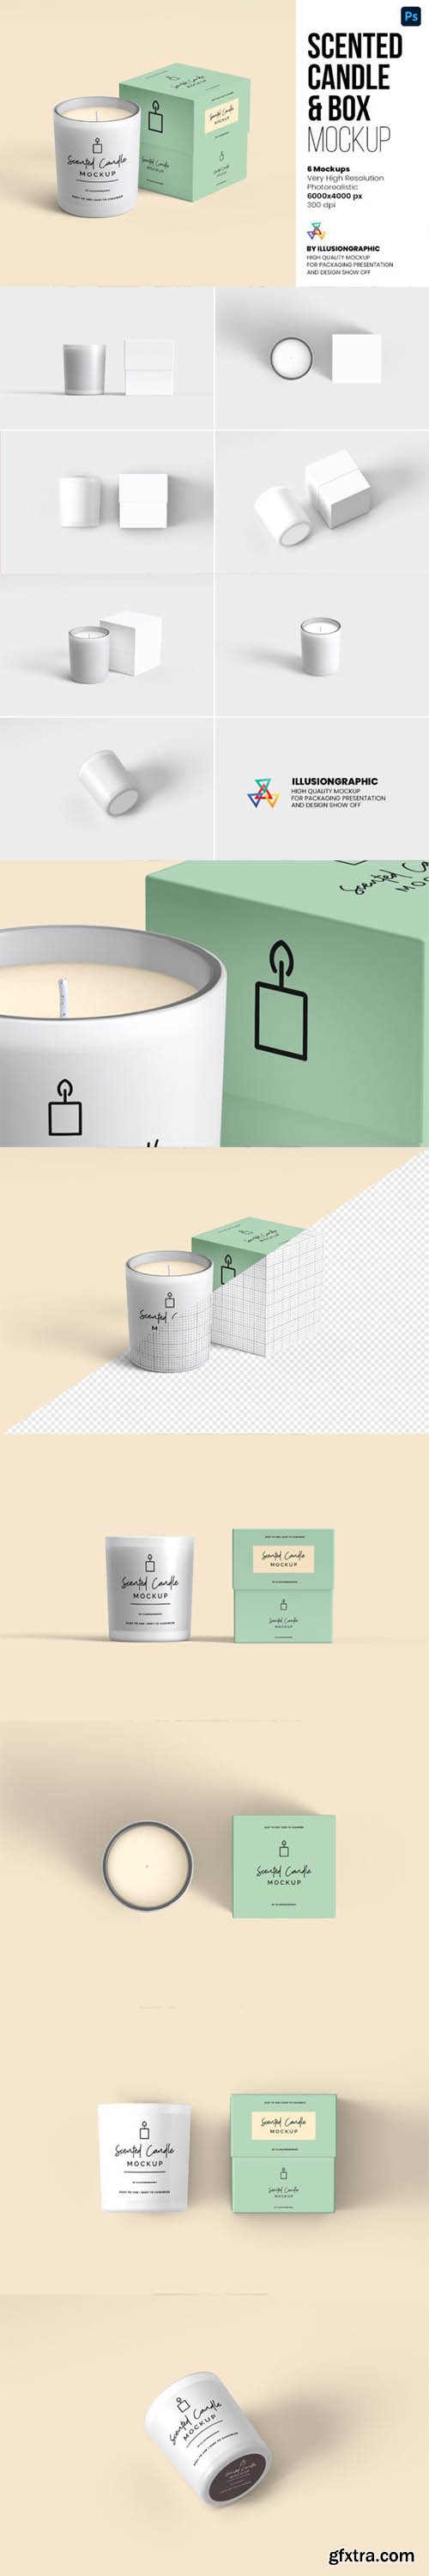 CreativeMarket - Scented Candle & Box Mockups 6721344